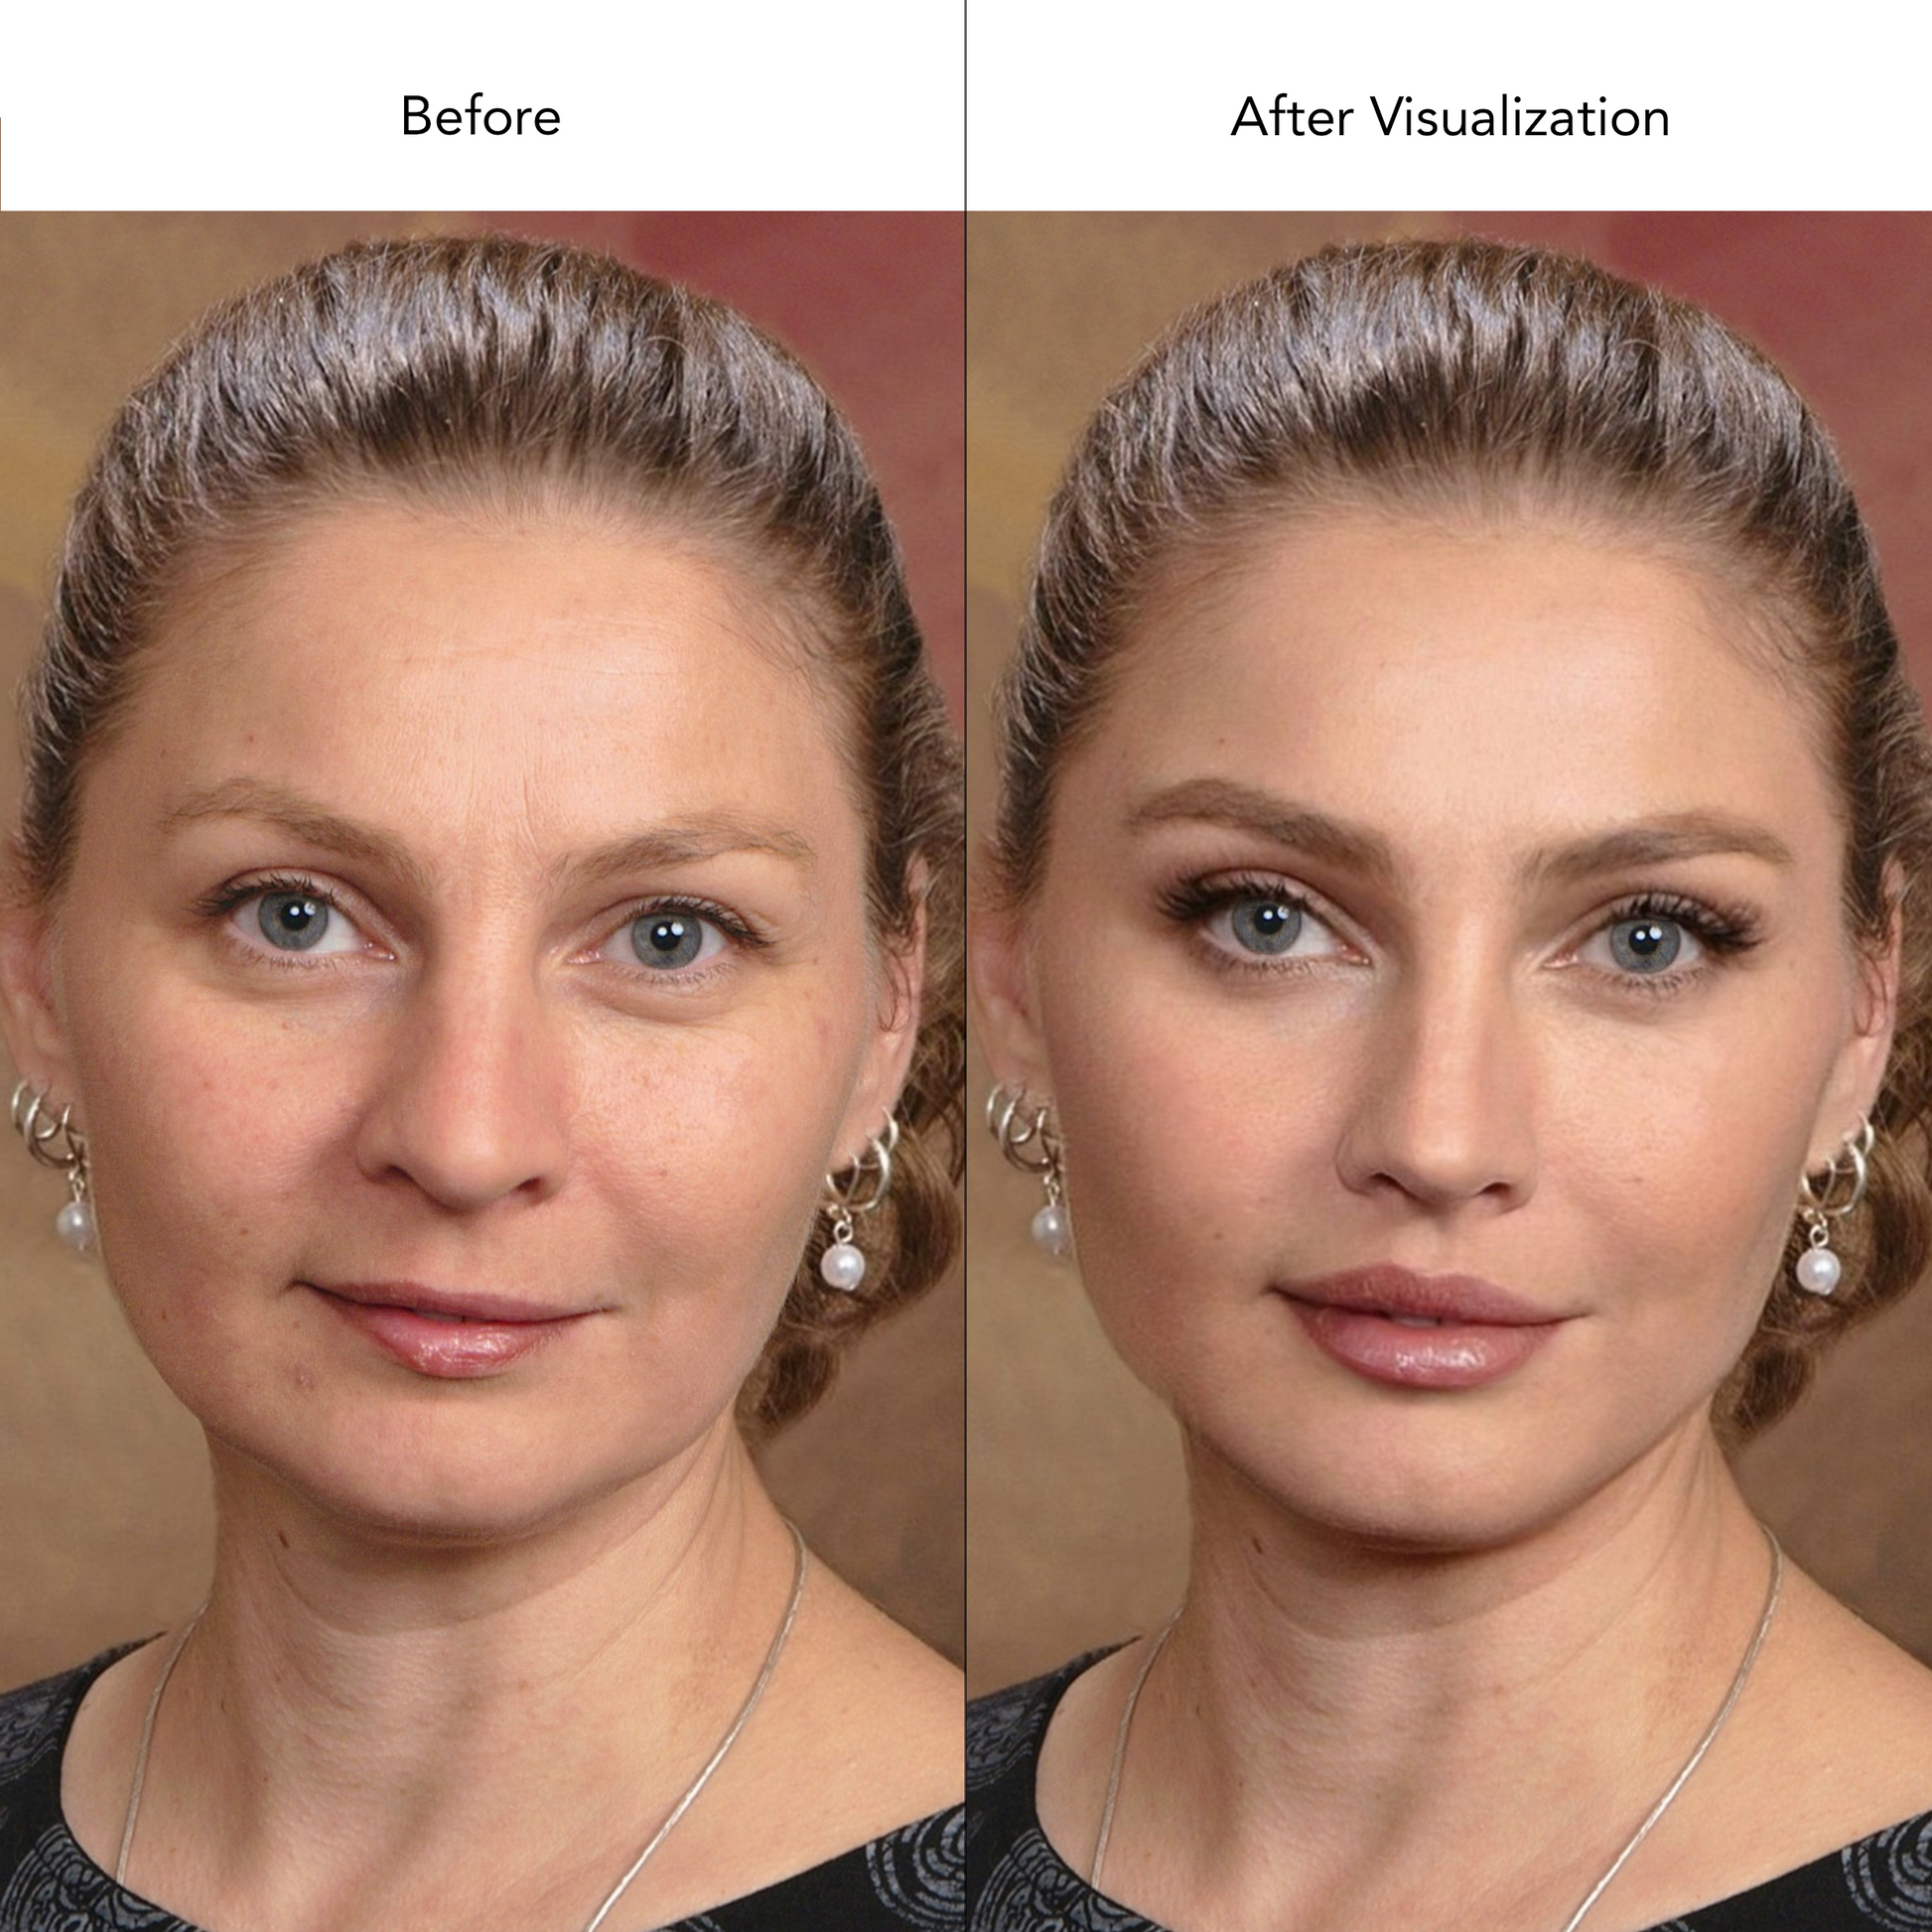 Plastic Surgery Visualization Before and After Photo - Ultimate Service